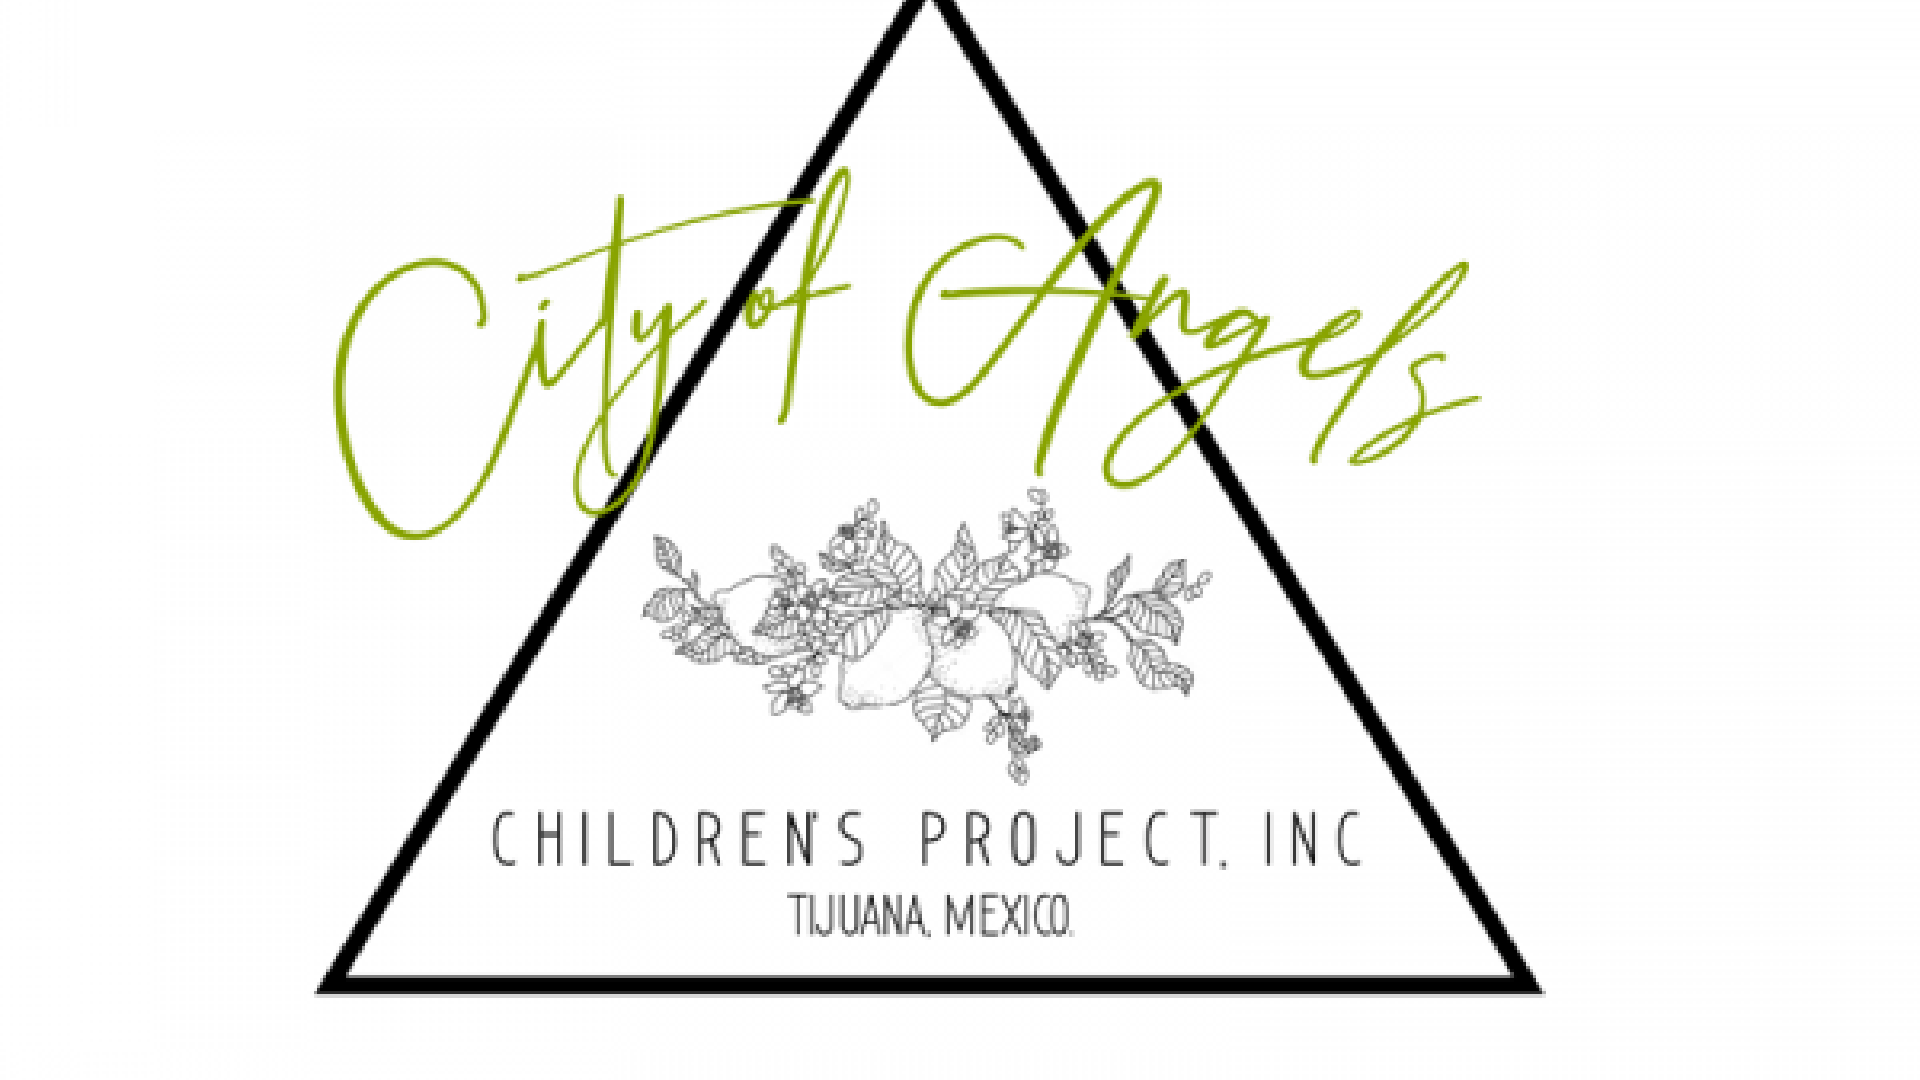 City Of Angels Children's Project logo